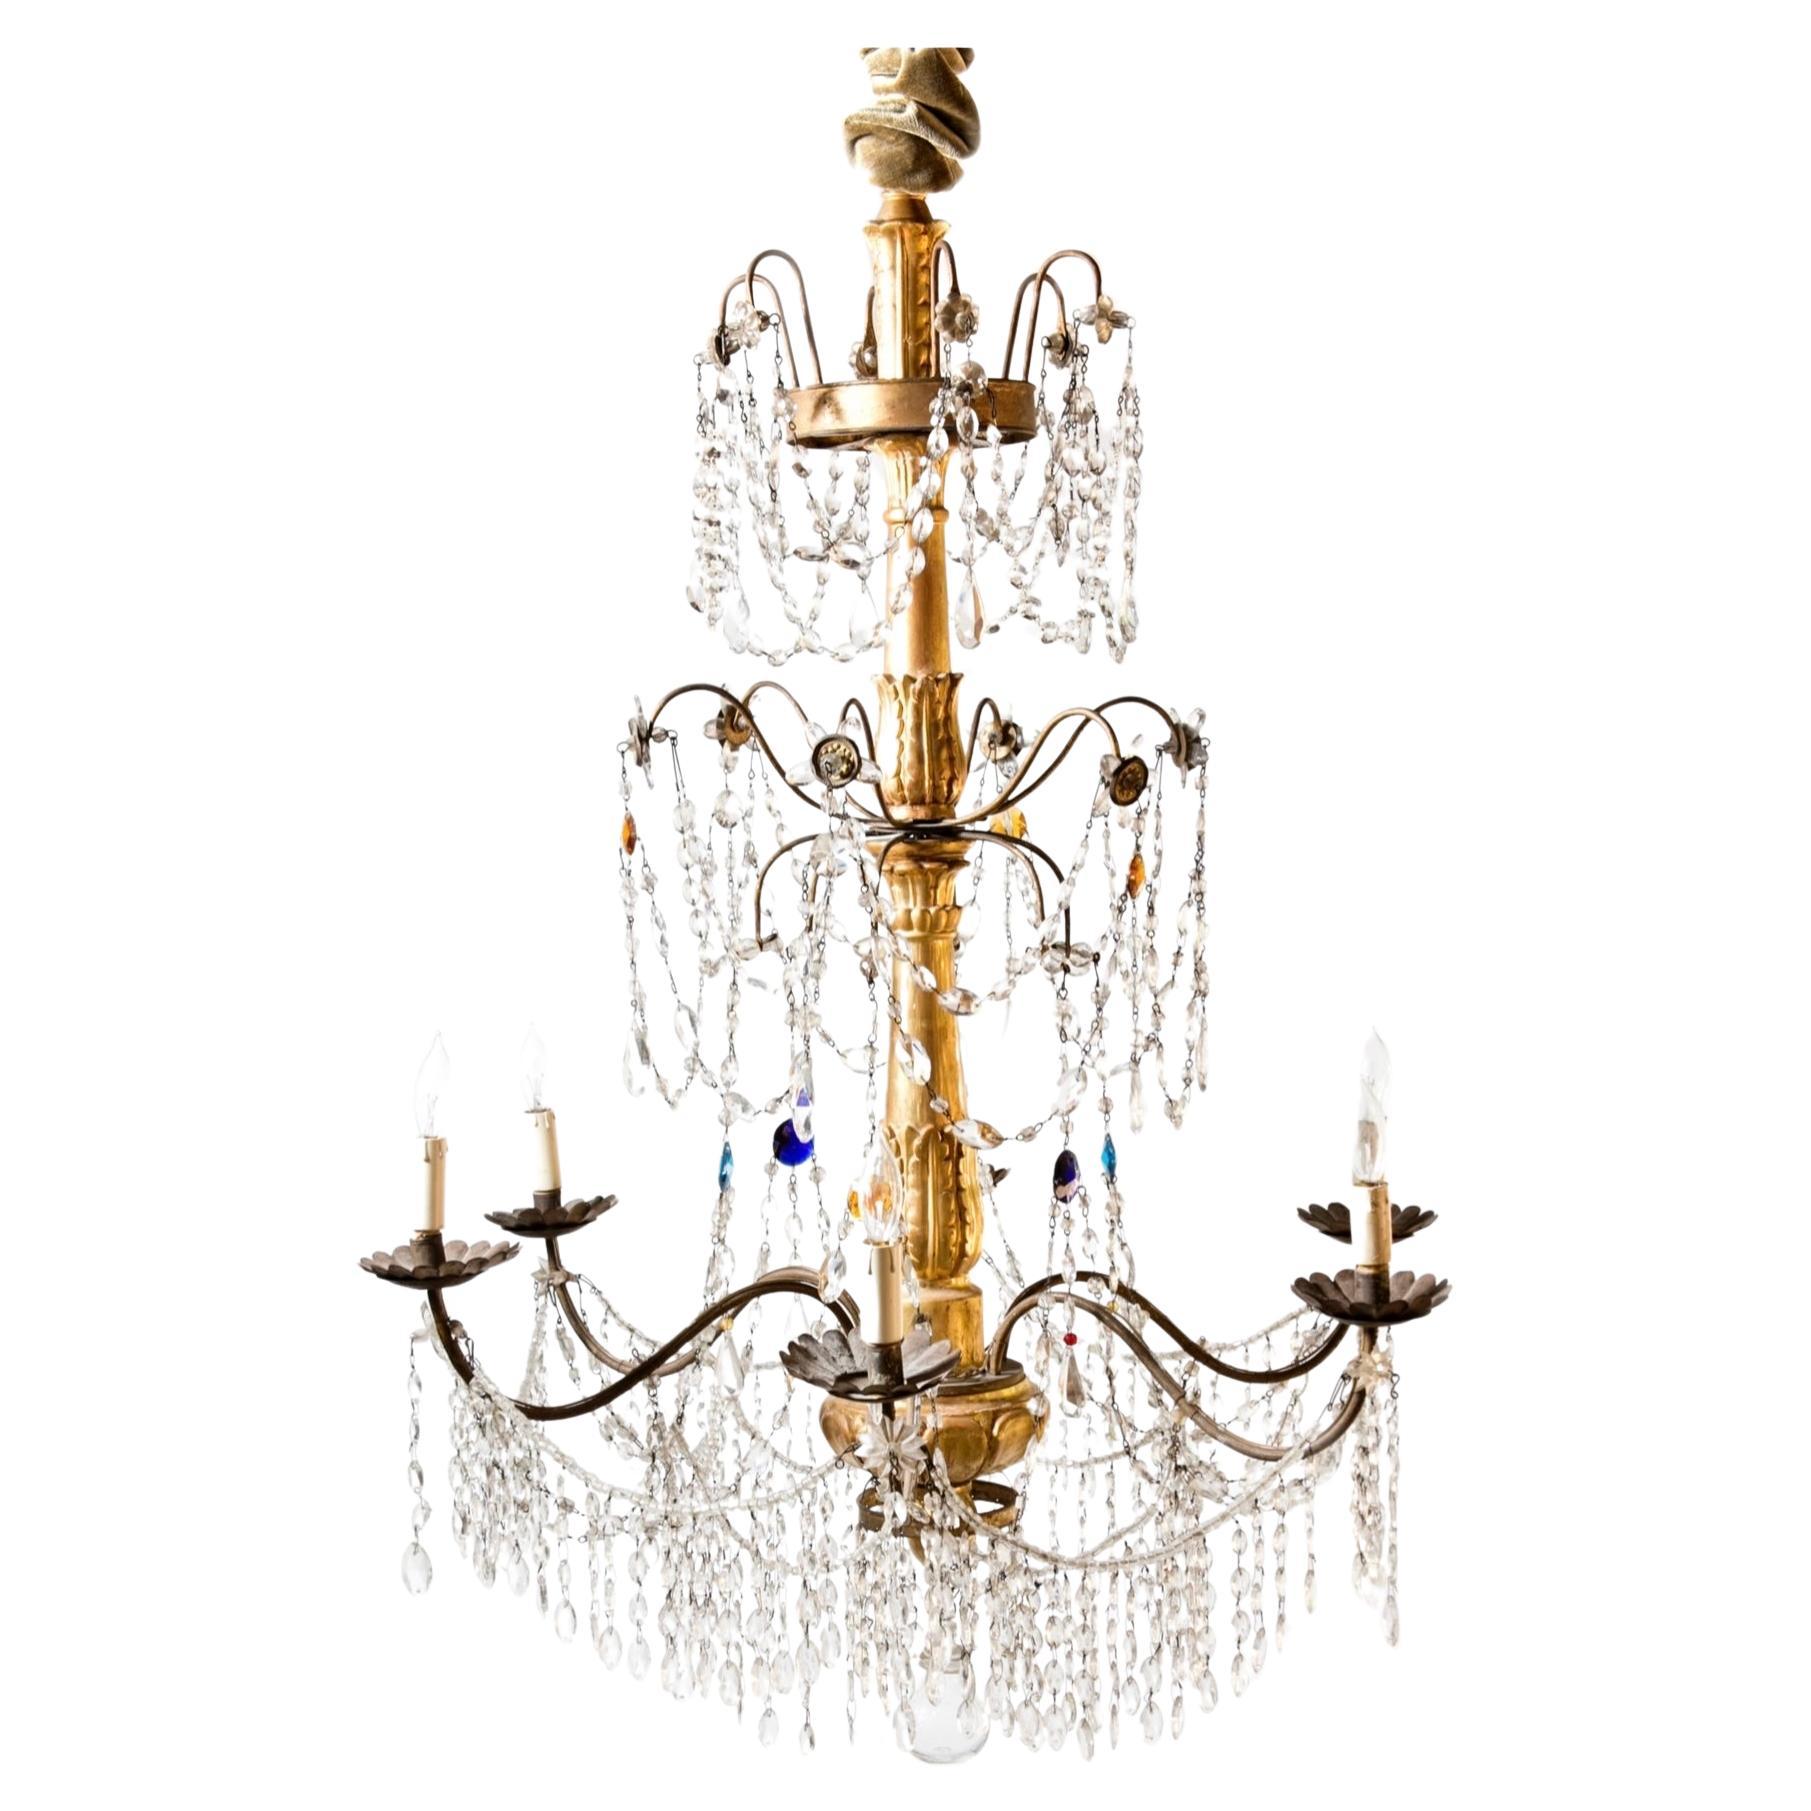  Important Late 18th c  Genovese Chandelier 